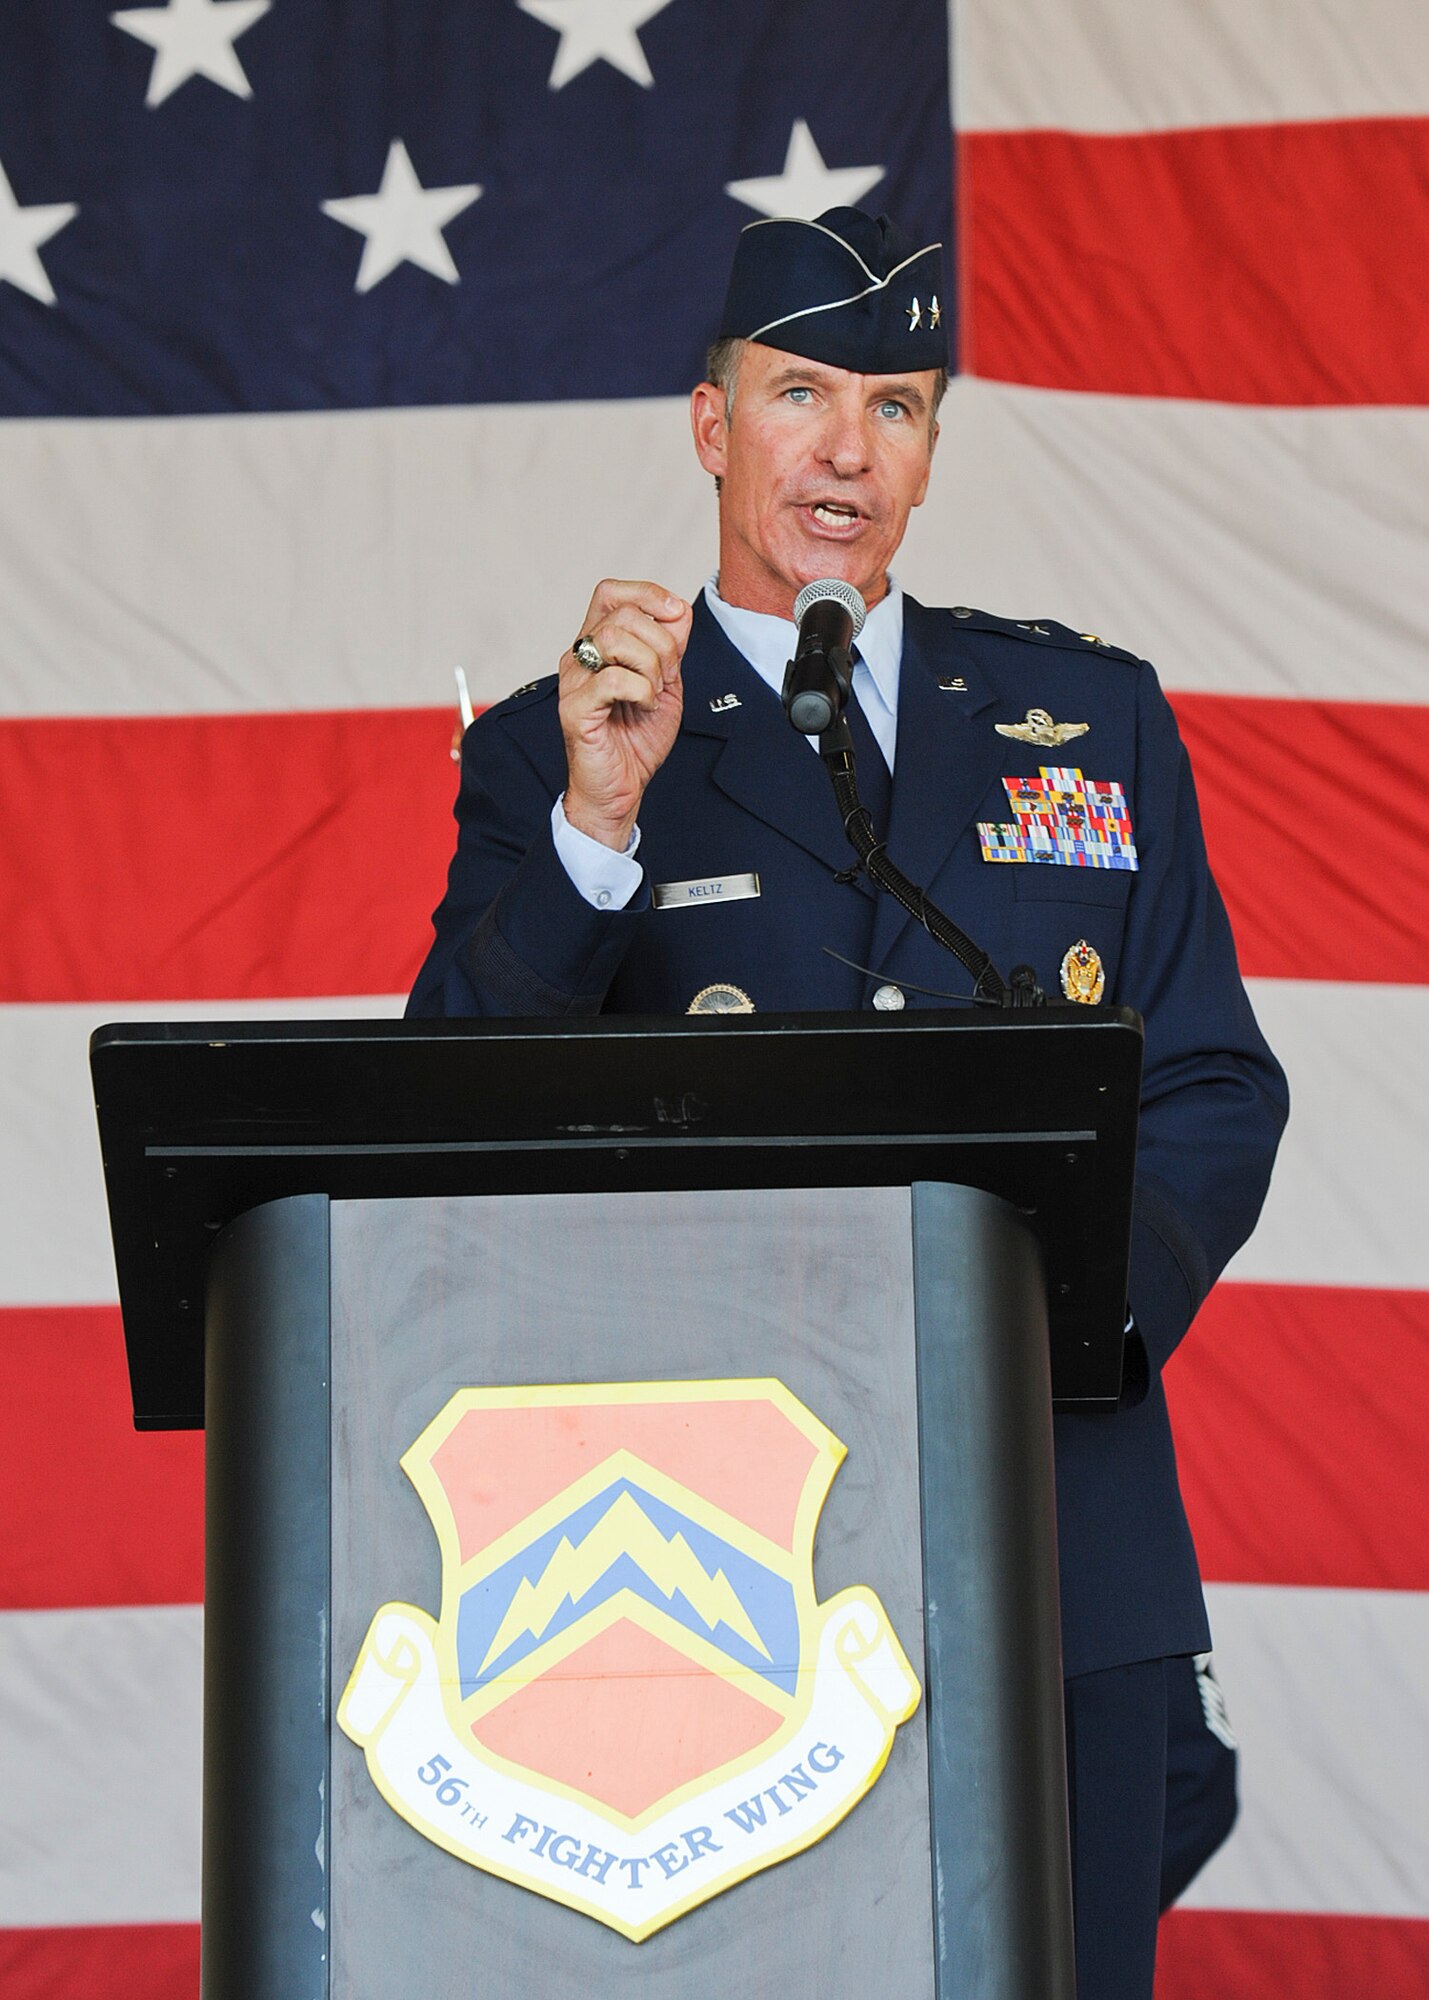 Maj. Gen. Michael Keltz, director of intelligence, operations and nuclear integration at Air Education and Training Command headquarters, officiates the 56th Fighter Wing change of command ceremony at Luke Air Force Base on June 20. Brig. Gen. Scott Pleus assumed command from outgoing commander Brig. Gen. Michael Rothstein. (U.S. Air Force photo/Staff Sgt. Darlene Setlmann)